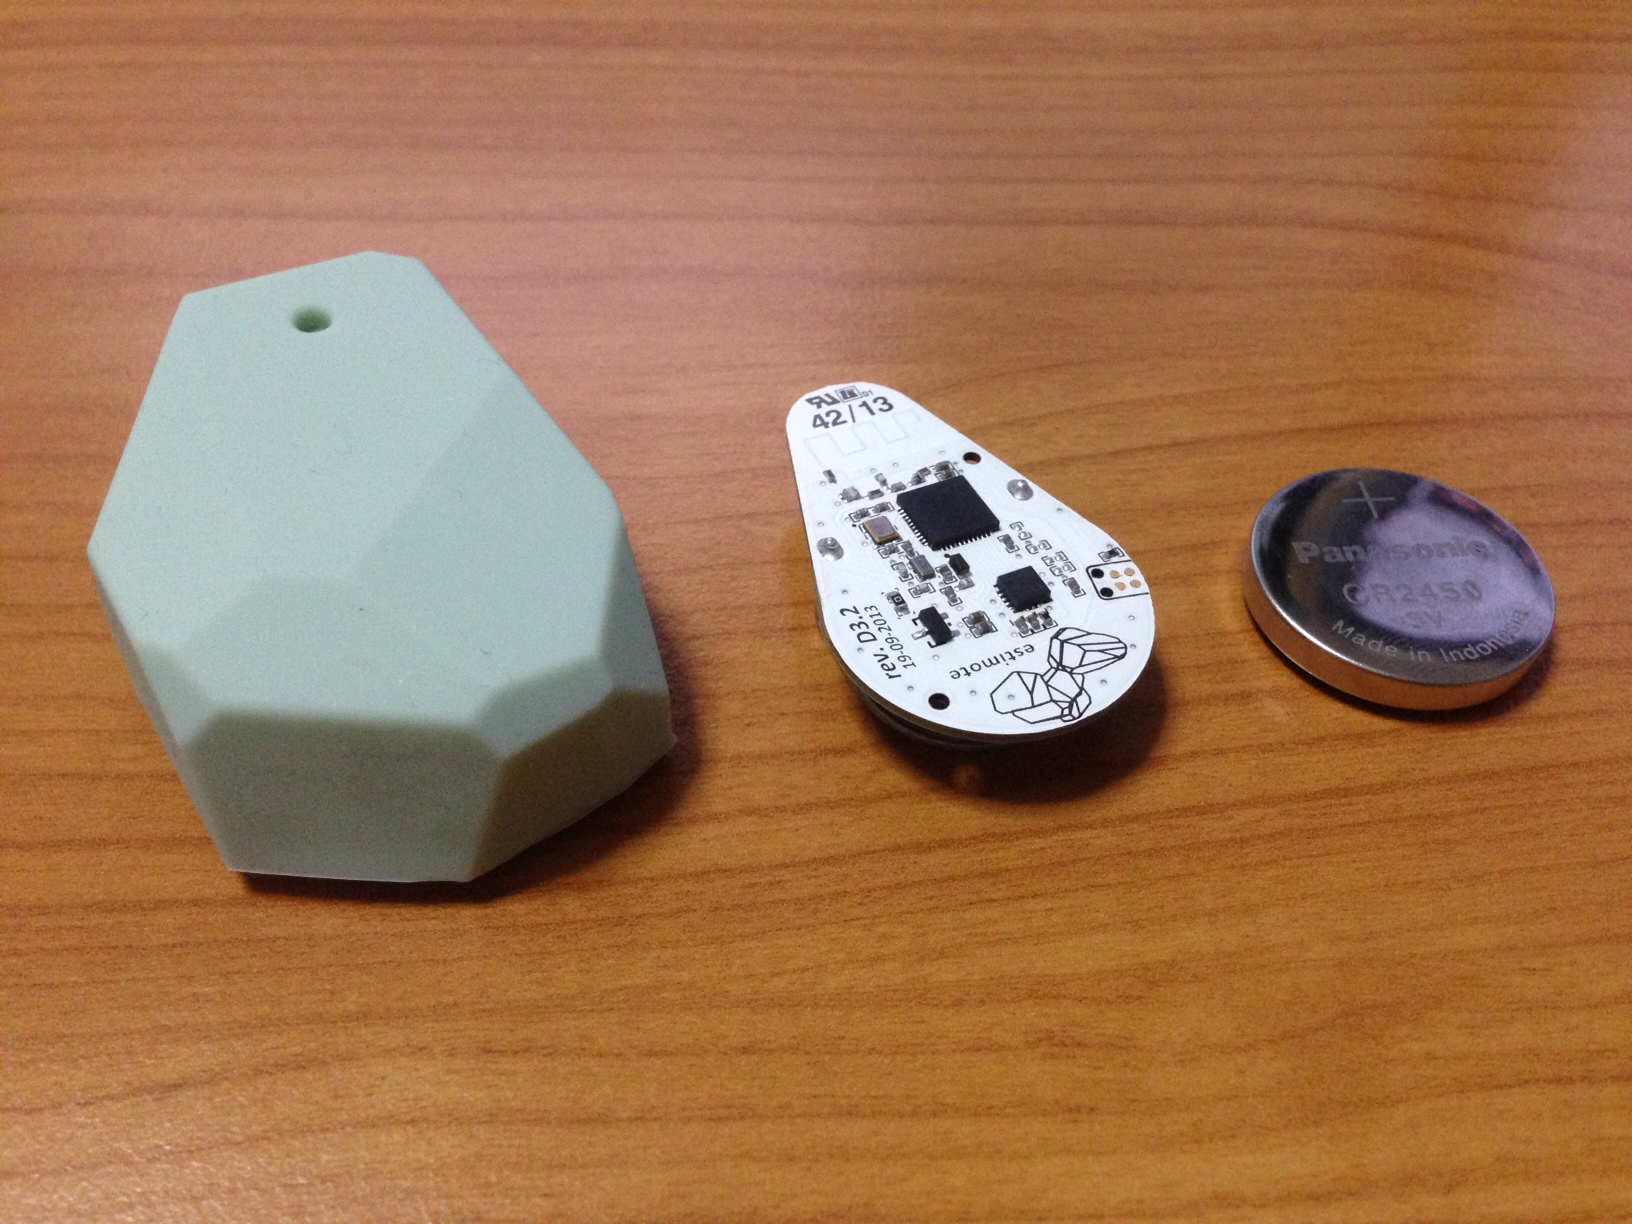 Figure 3: The Estimote iBeacon and its innards, with the battery removed.